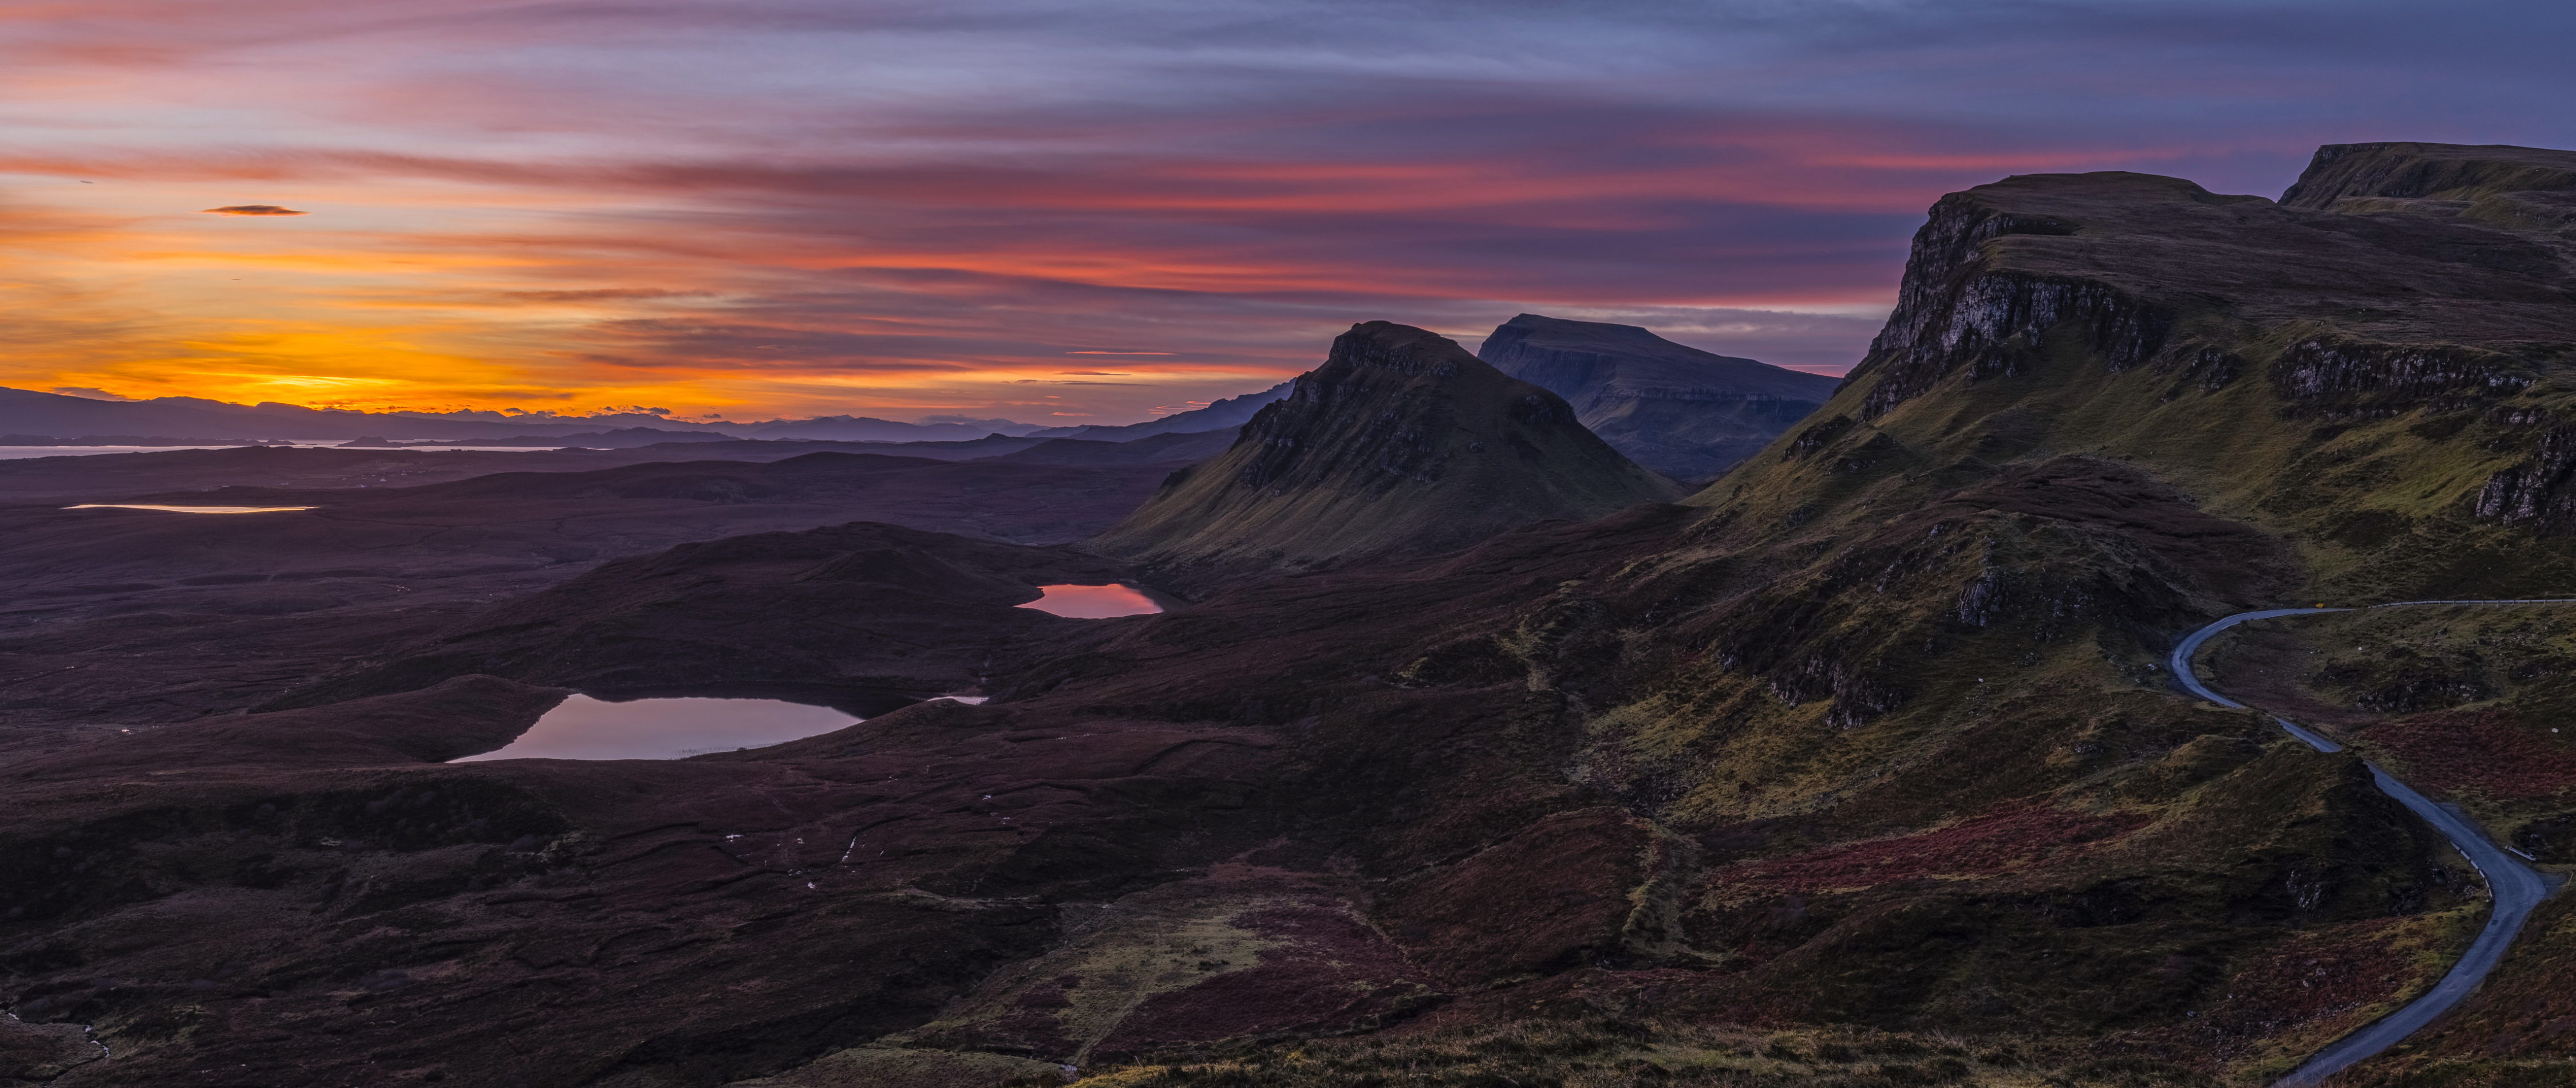 General 4500x1900 nature landscape mountains sunset pond road grass far view sky clouds sunrise mist the quiraing Scotland ultrawide